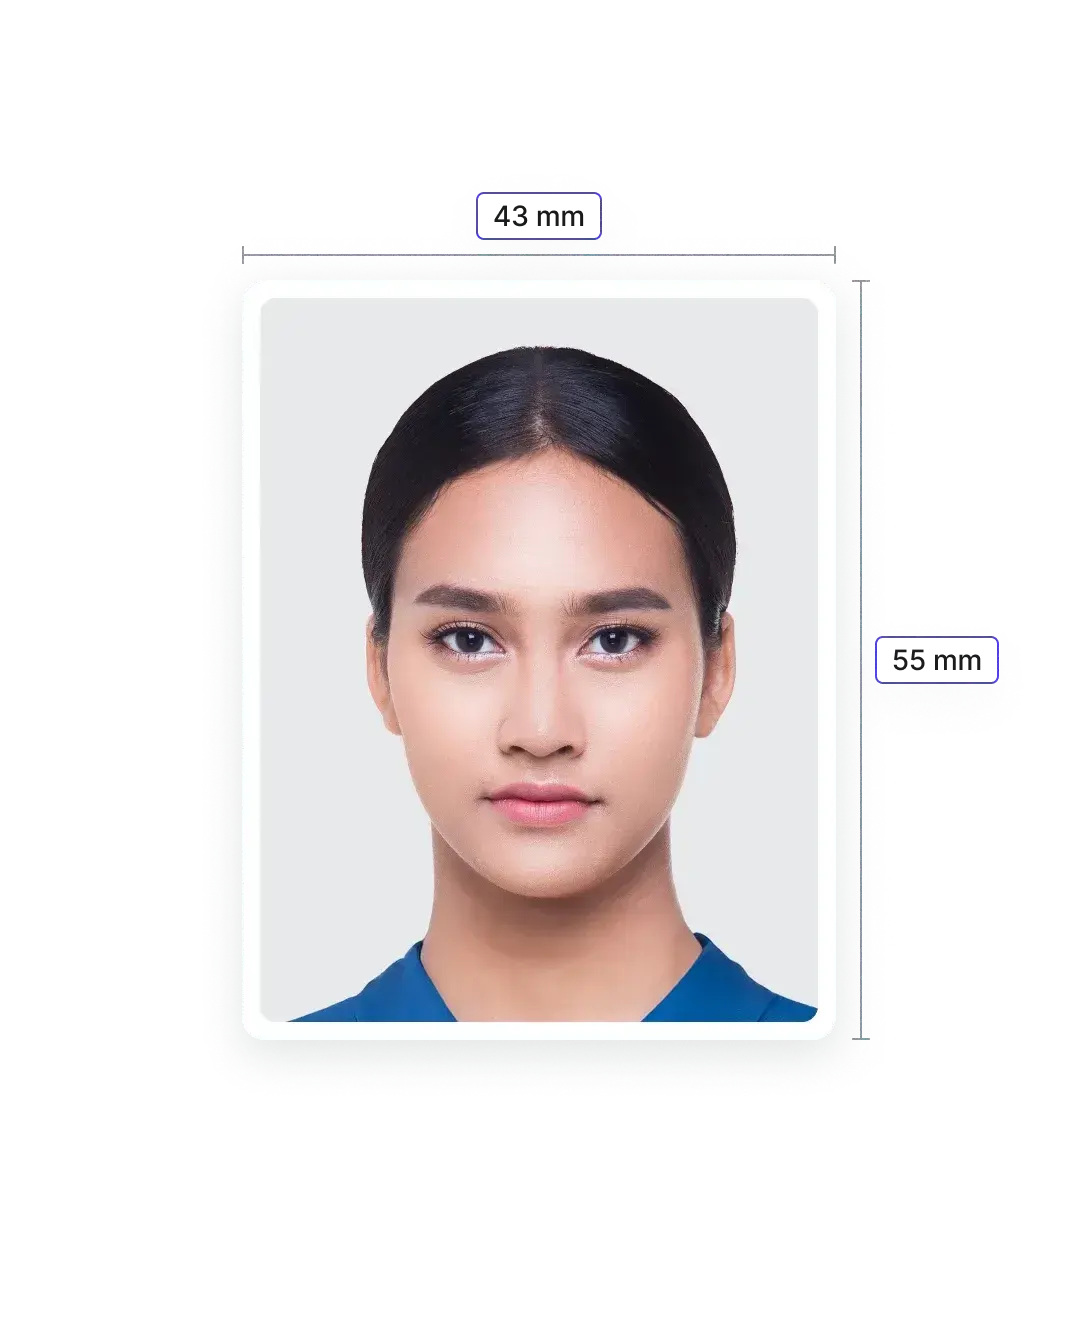 UAE Visa Photo: Size and Requirements